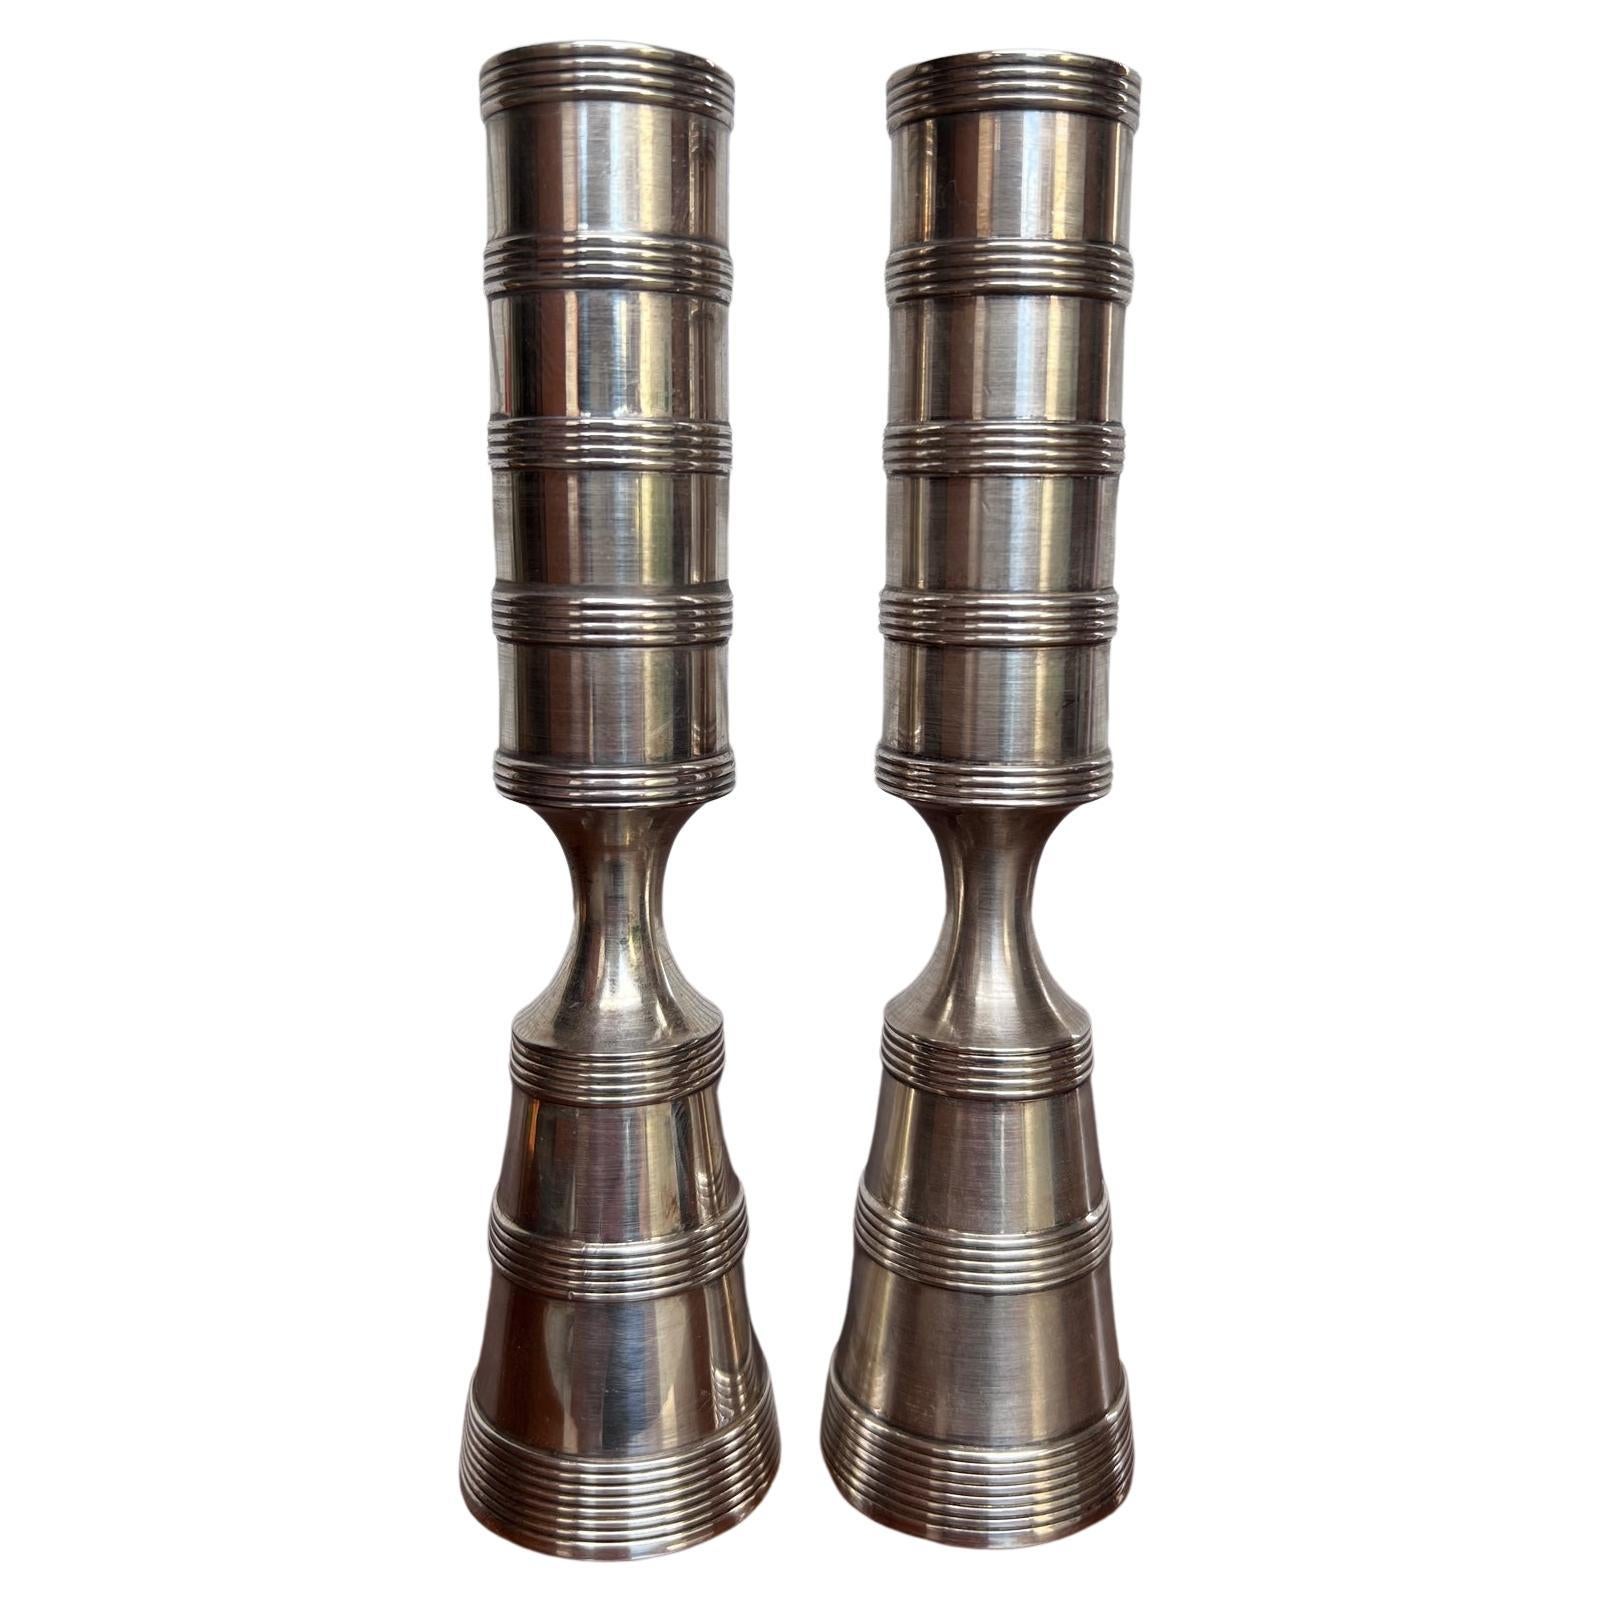 Pair of Danish Mid-Century Modern Candlesticks by Jens Quistgaard For Sale